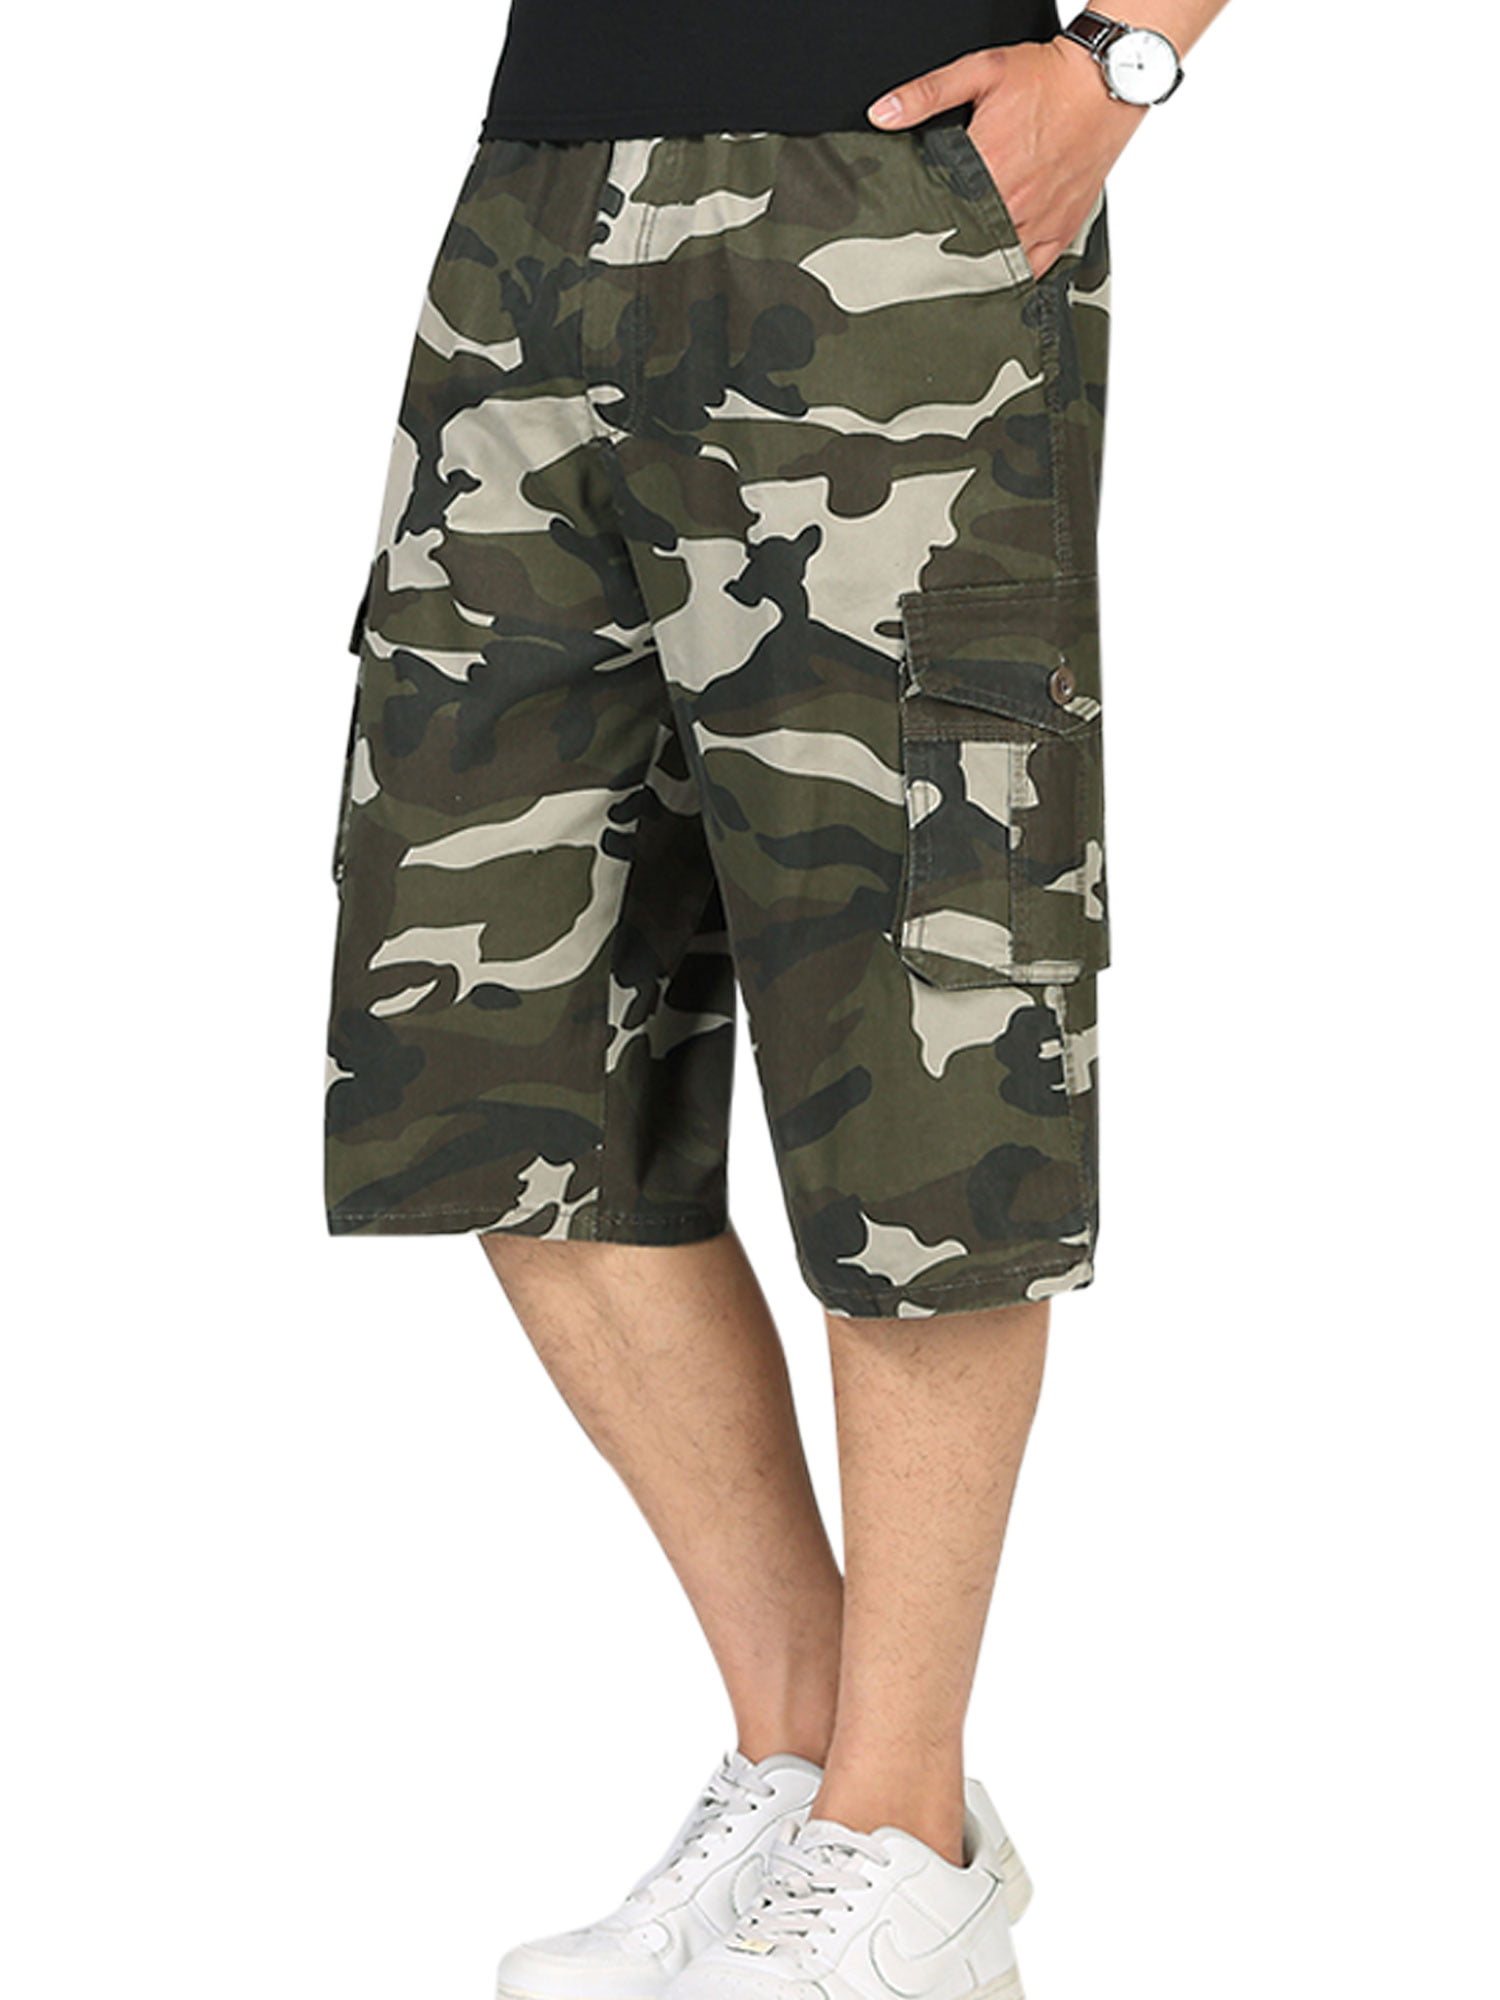 YIWNG Adult Mens Beach Trousers Camo Army Camouflage Military Design Surf Shorts 